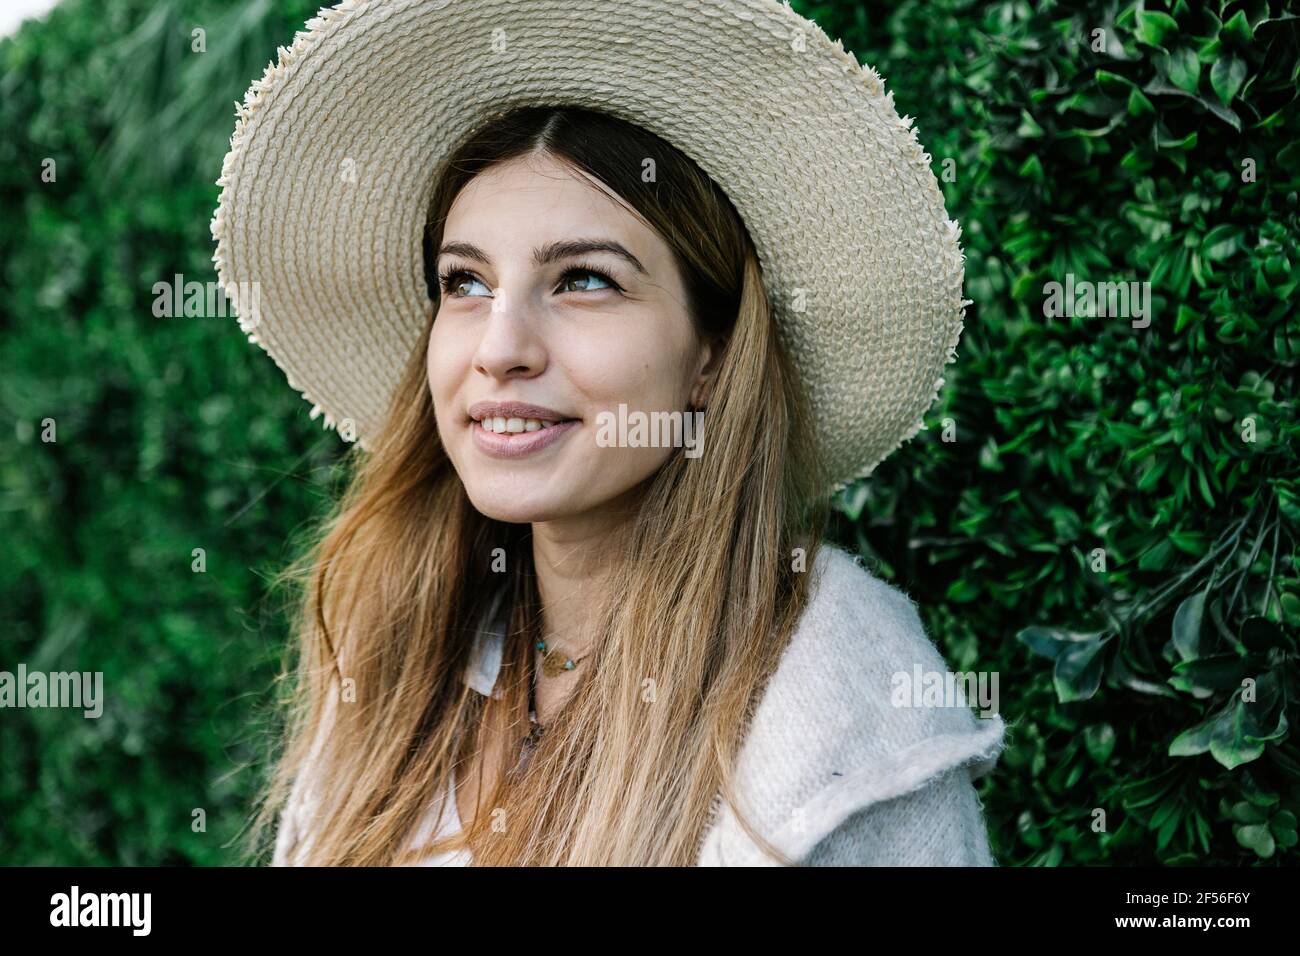 Thoughtful young woman in hat by green plant wall Stock Photo